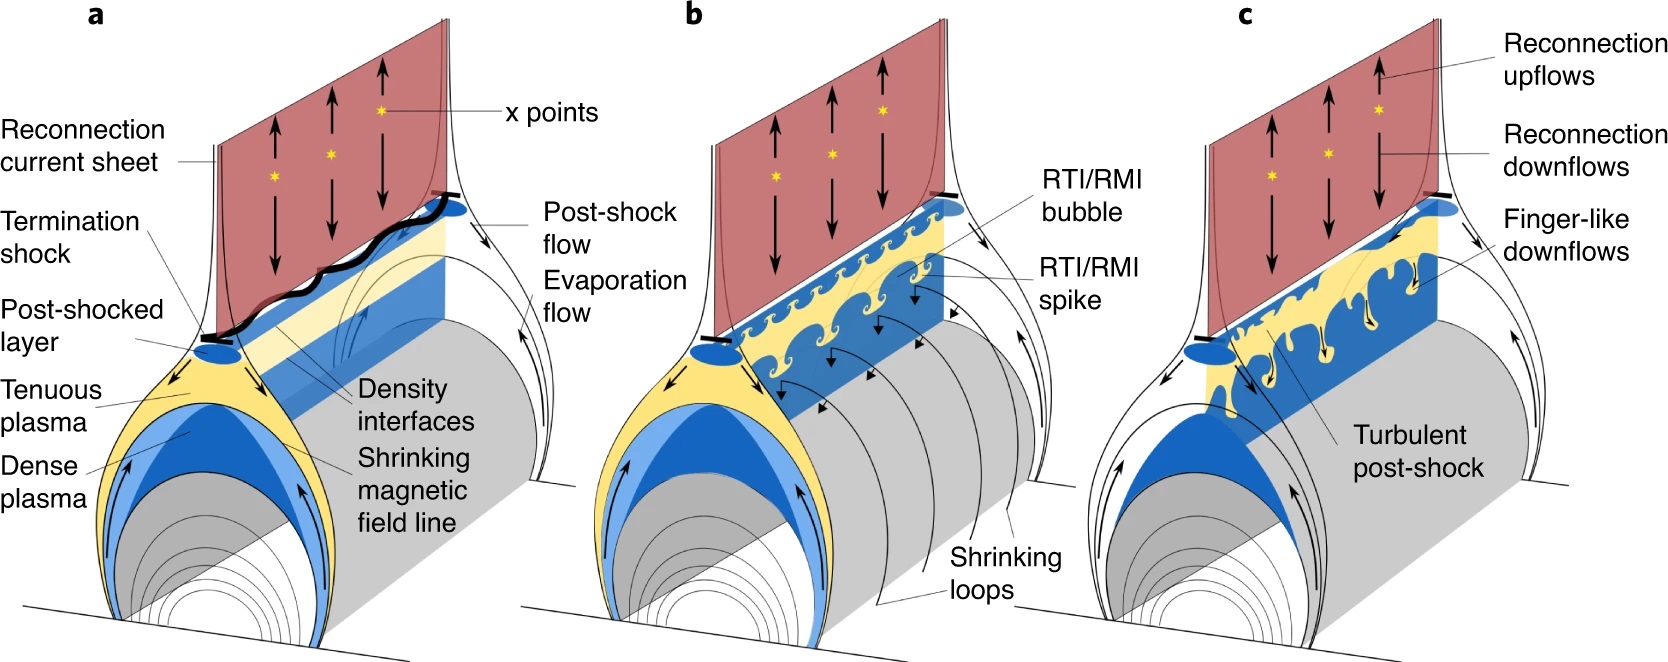 Scheme of the development of instabilities in the turbulent region under the reconnection current sheet. Credit: Chengcai Shen et al. / Nature Astronomy, 2022